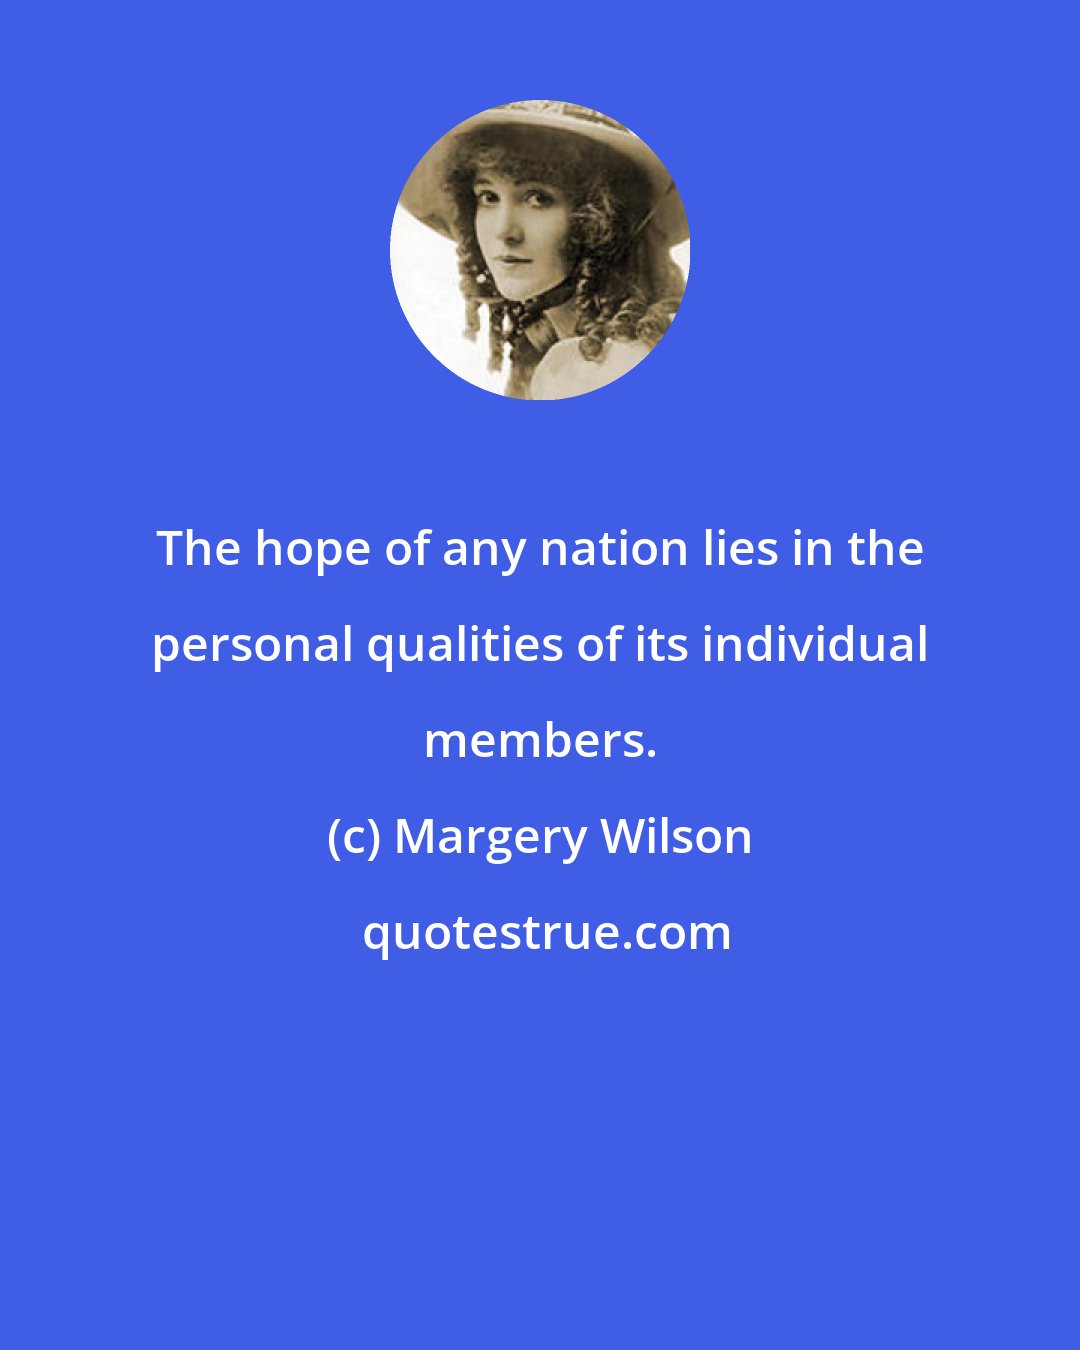 Margery Wilson: The hope of any nation lies in the personal qualities of its individual members.